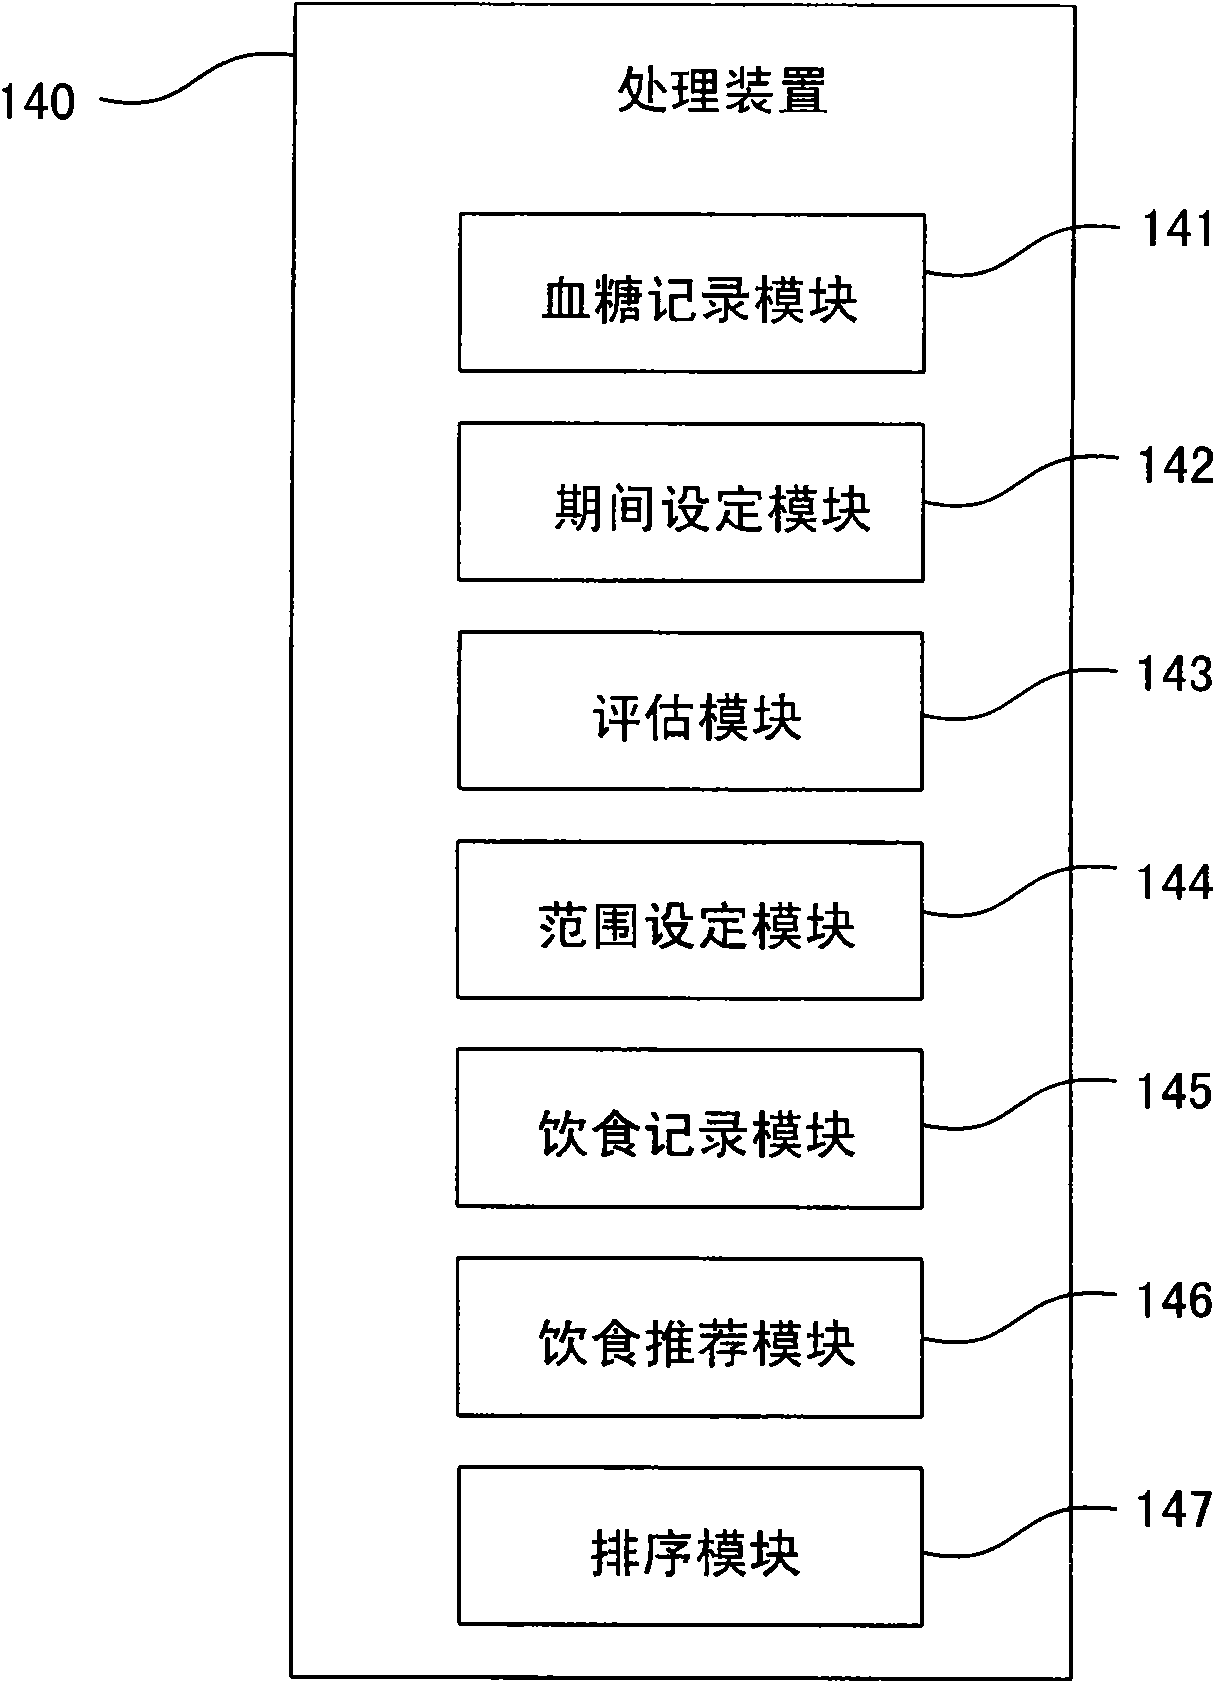 Blood sugar analysis system, device and method